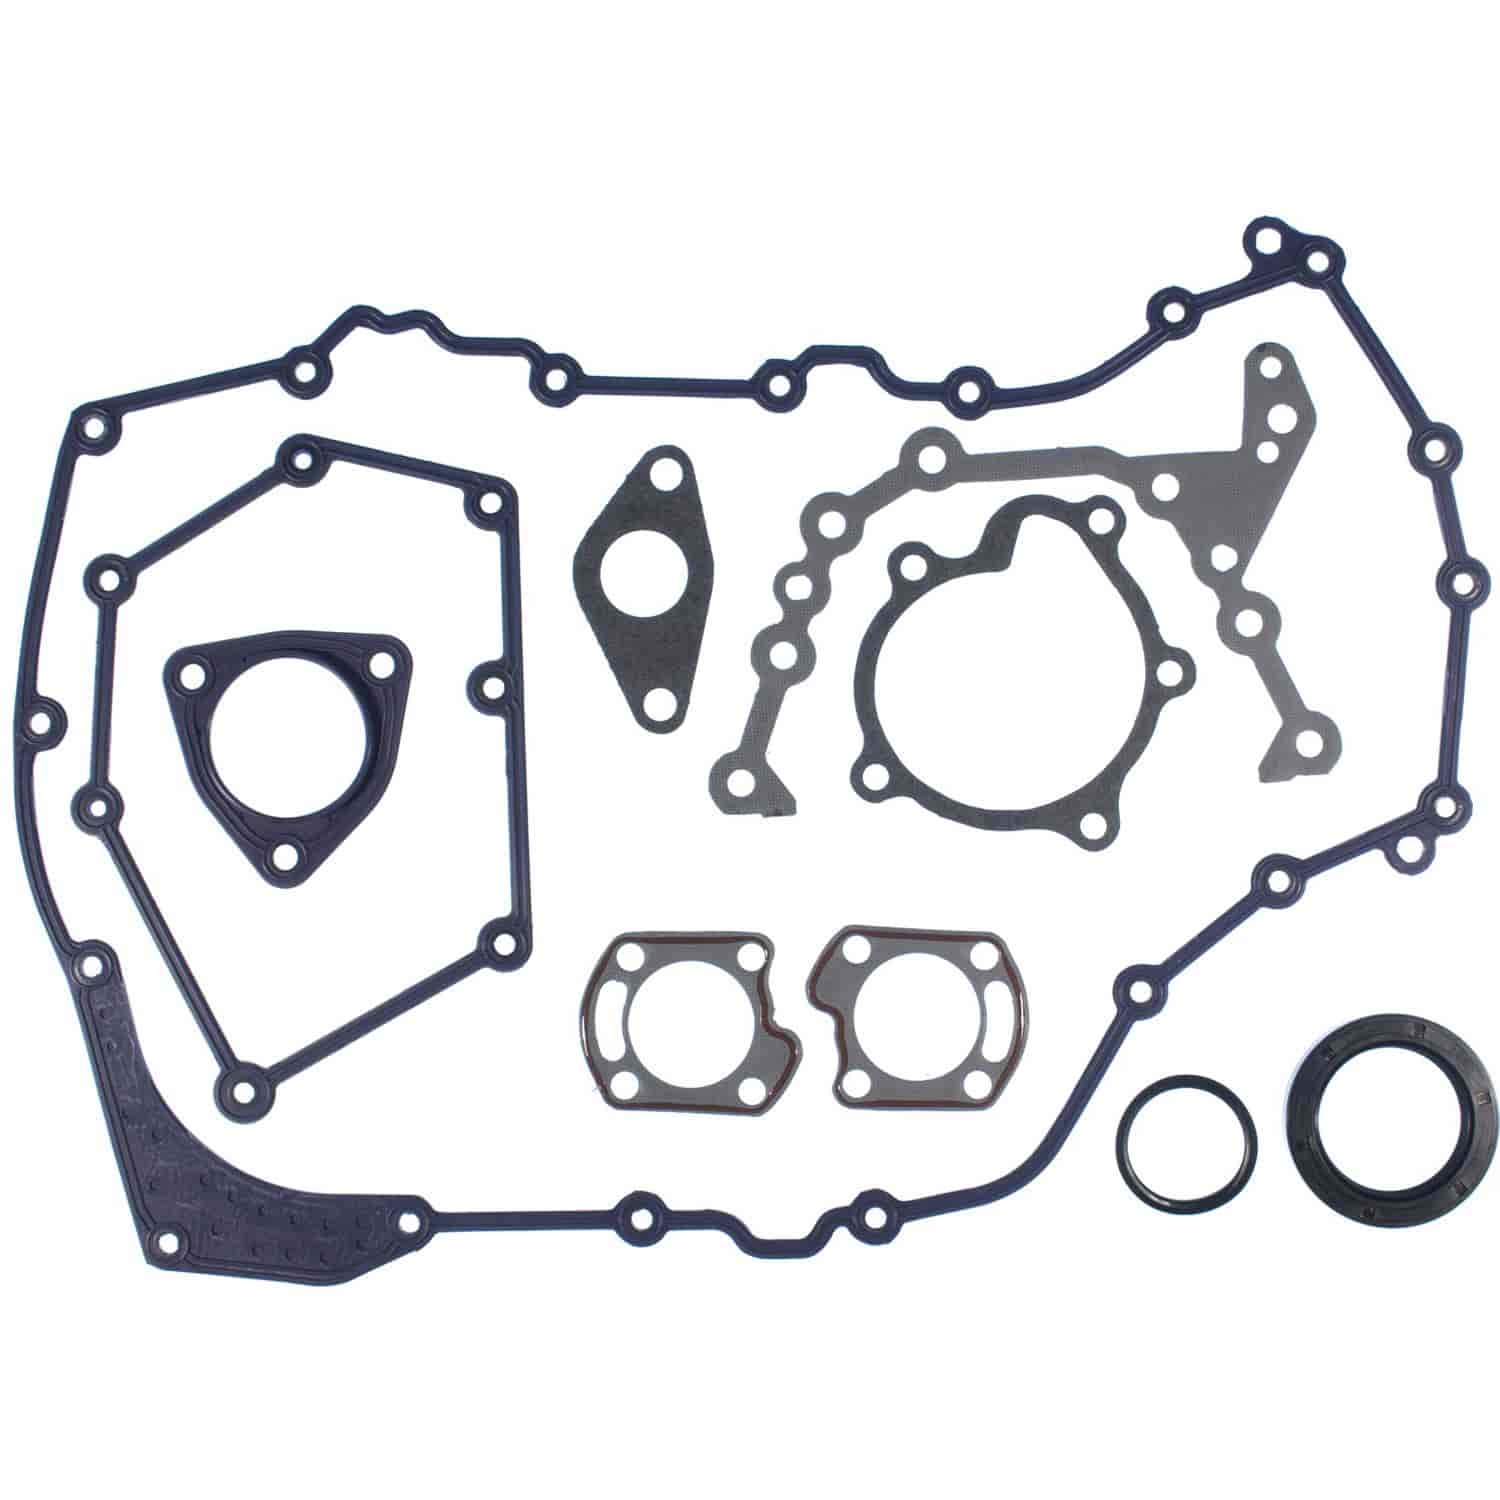 Timing Cover Set GM-Pass 146 2.4L 1996-98